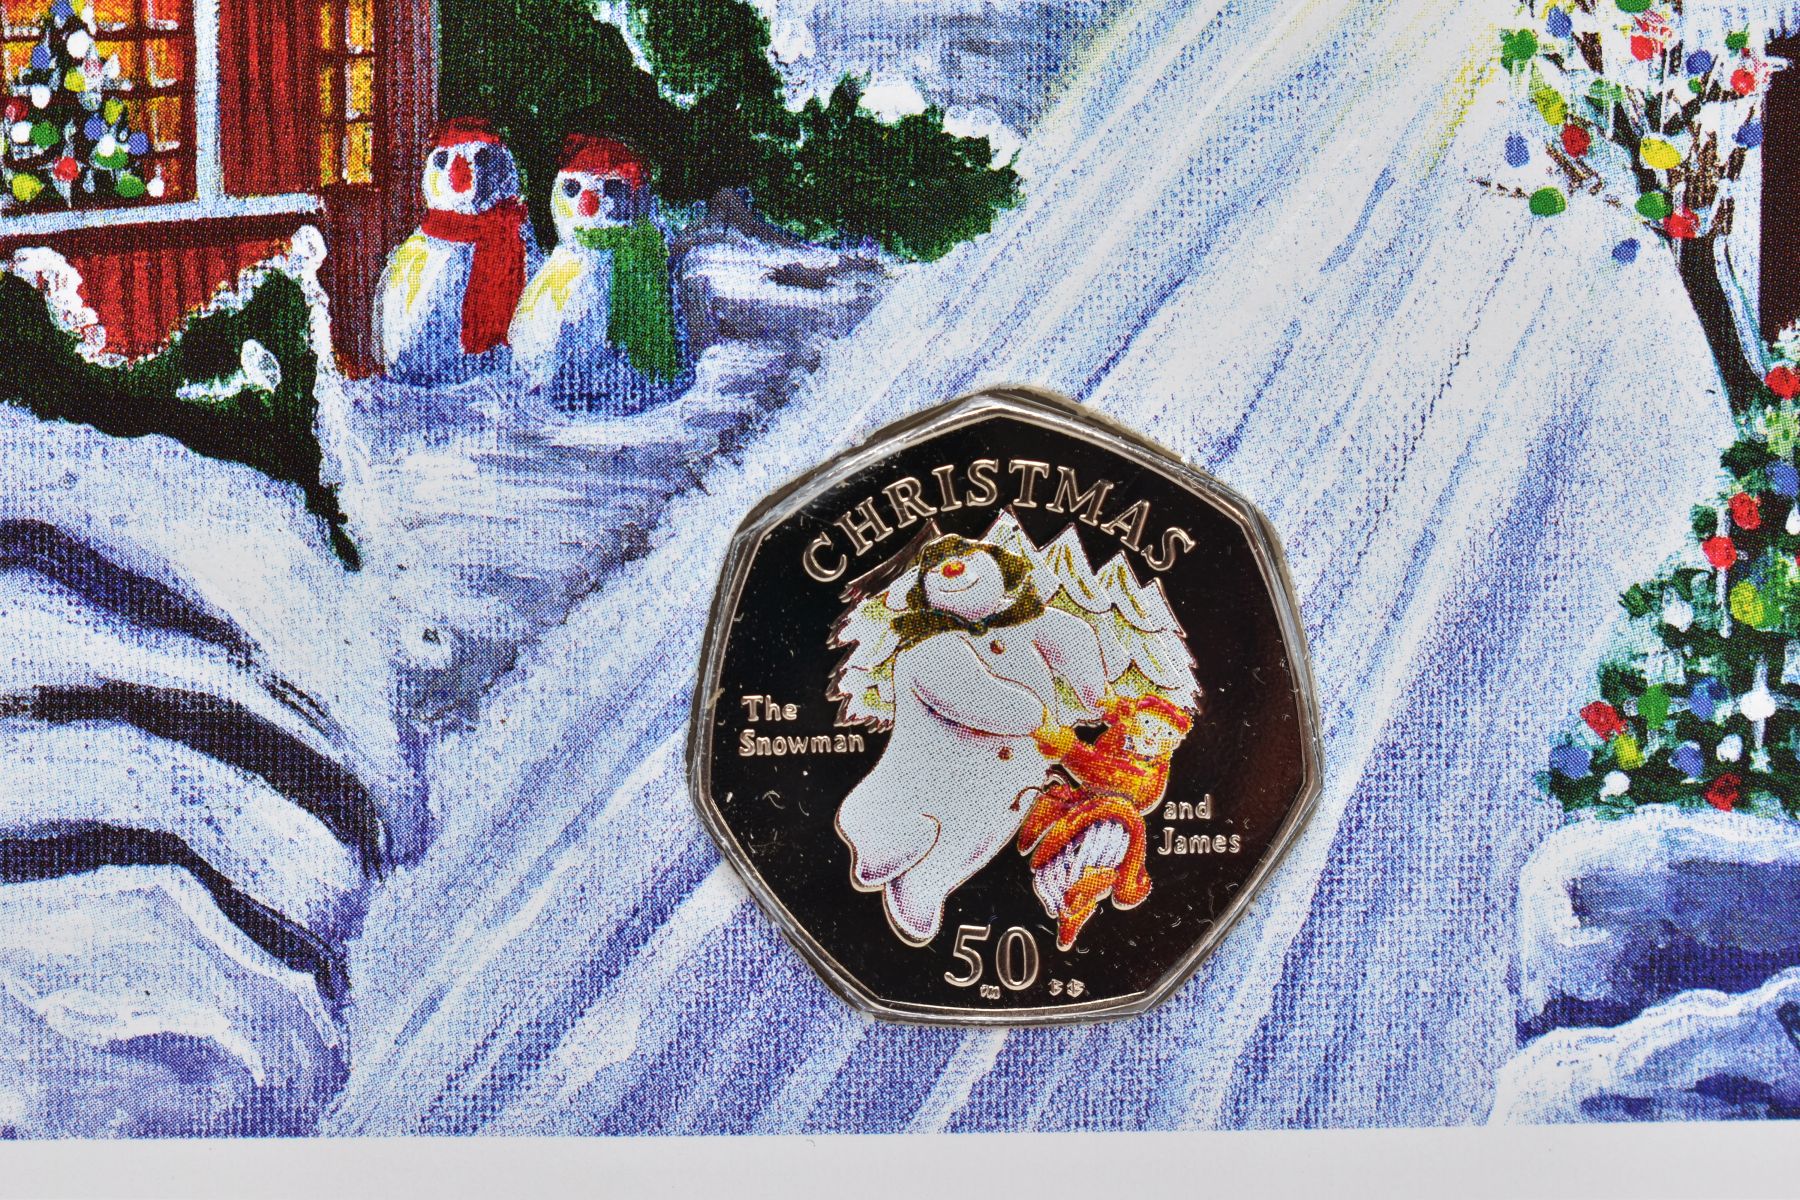 POBJOY ISLE OF MAN CHRISTMAS FITY PENCE COIN, The Snowman coloured 2003 on a season's greetings - Image 2 of 3